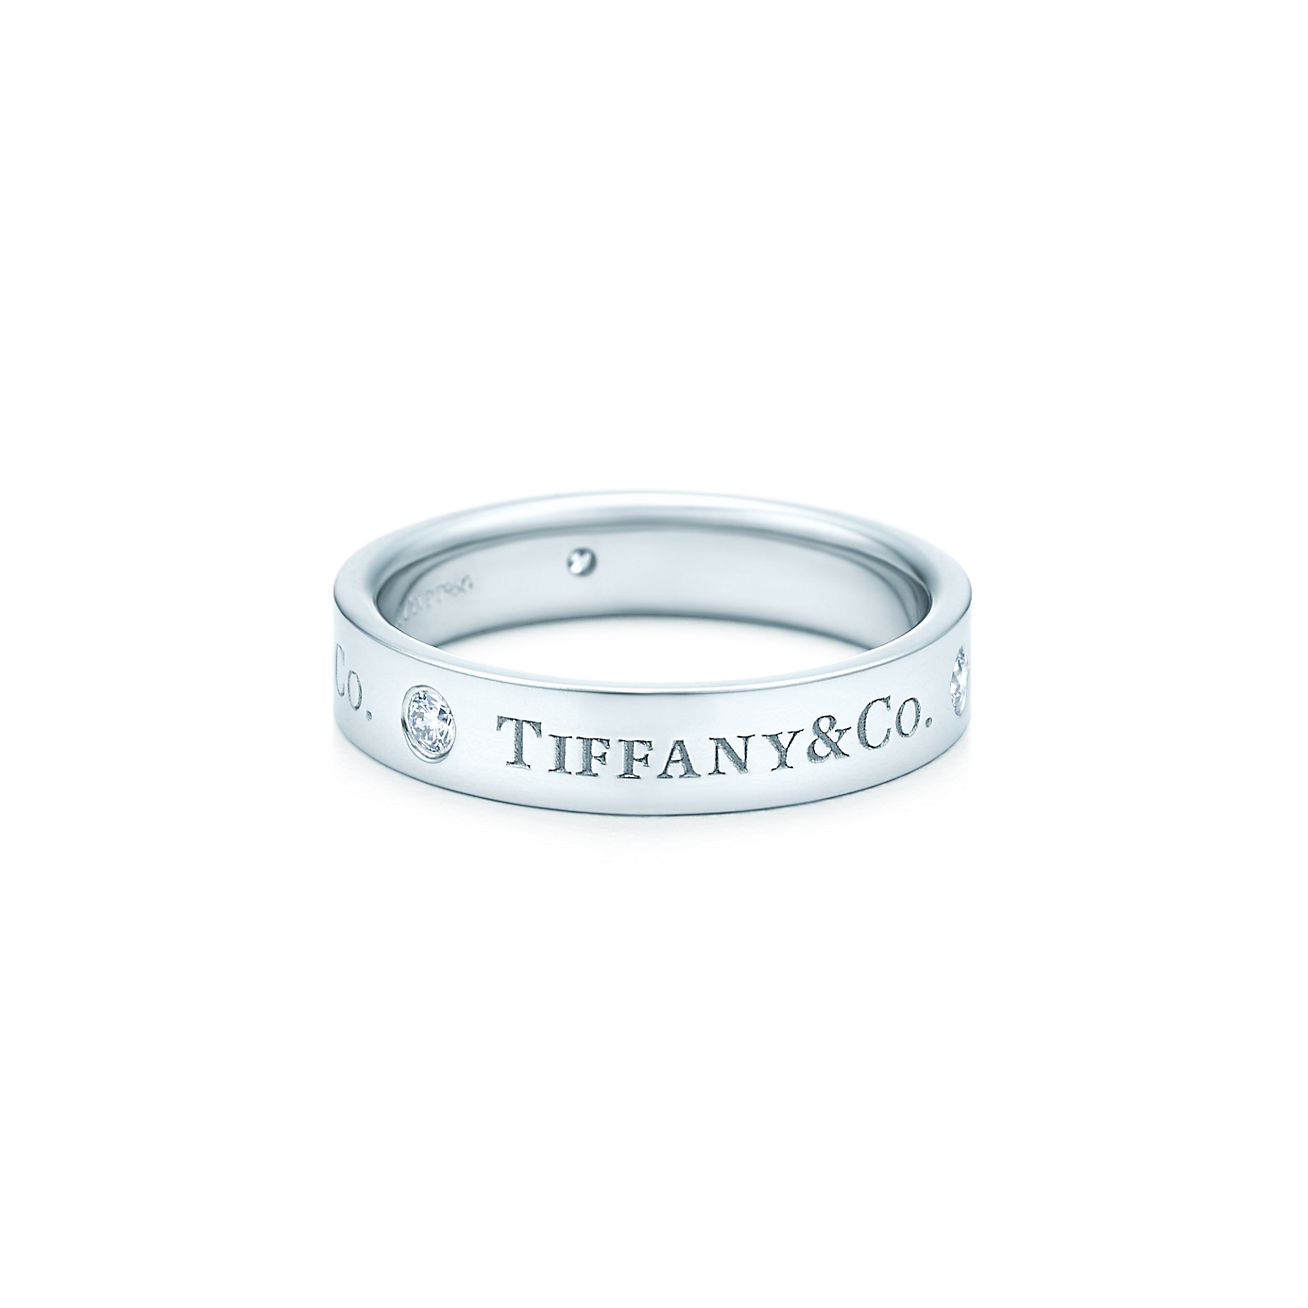 tiffany and co engraved ring